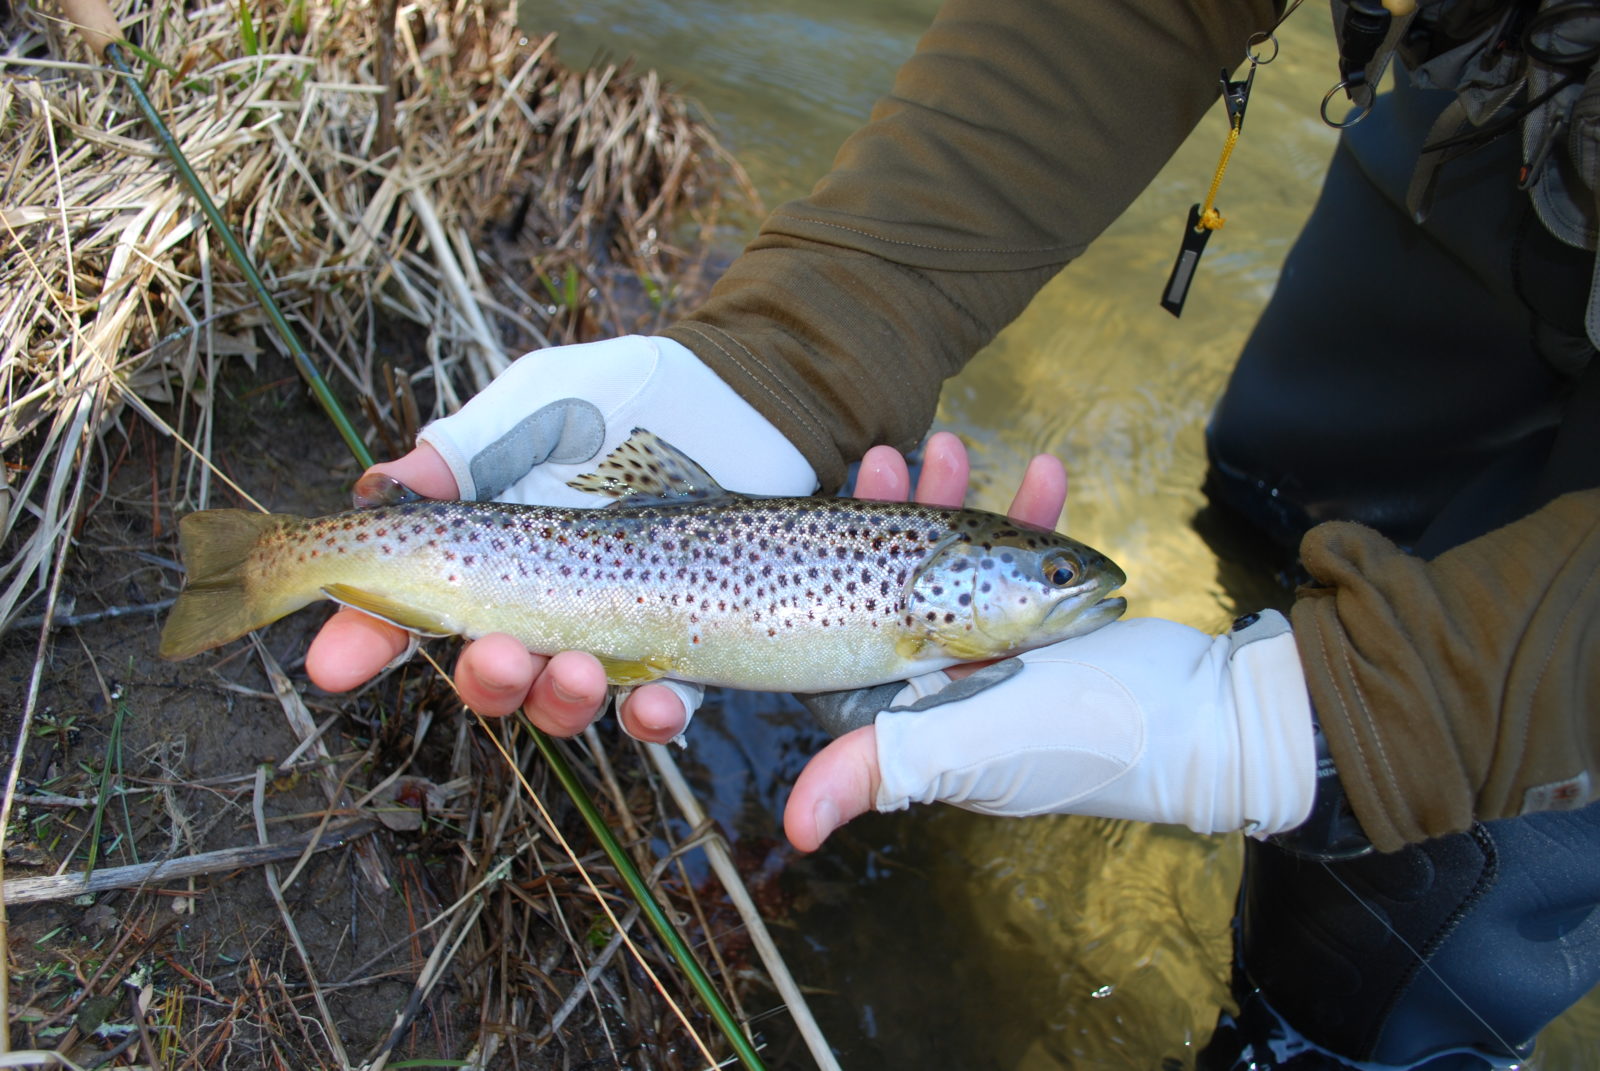 An image of an angler holding a brown trout